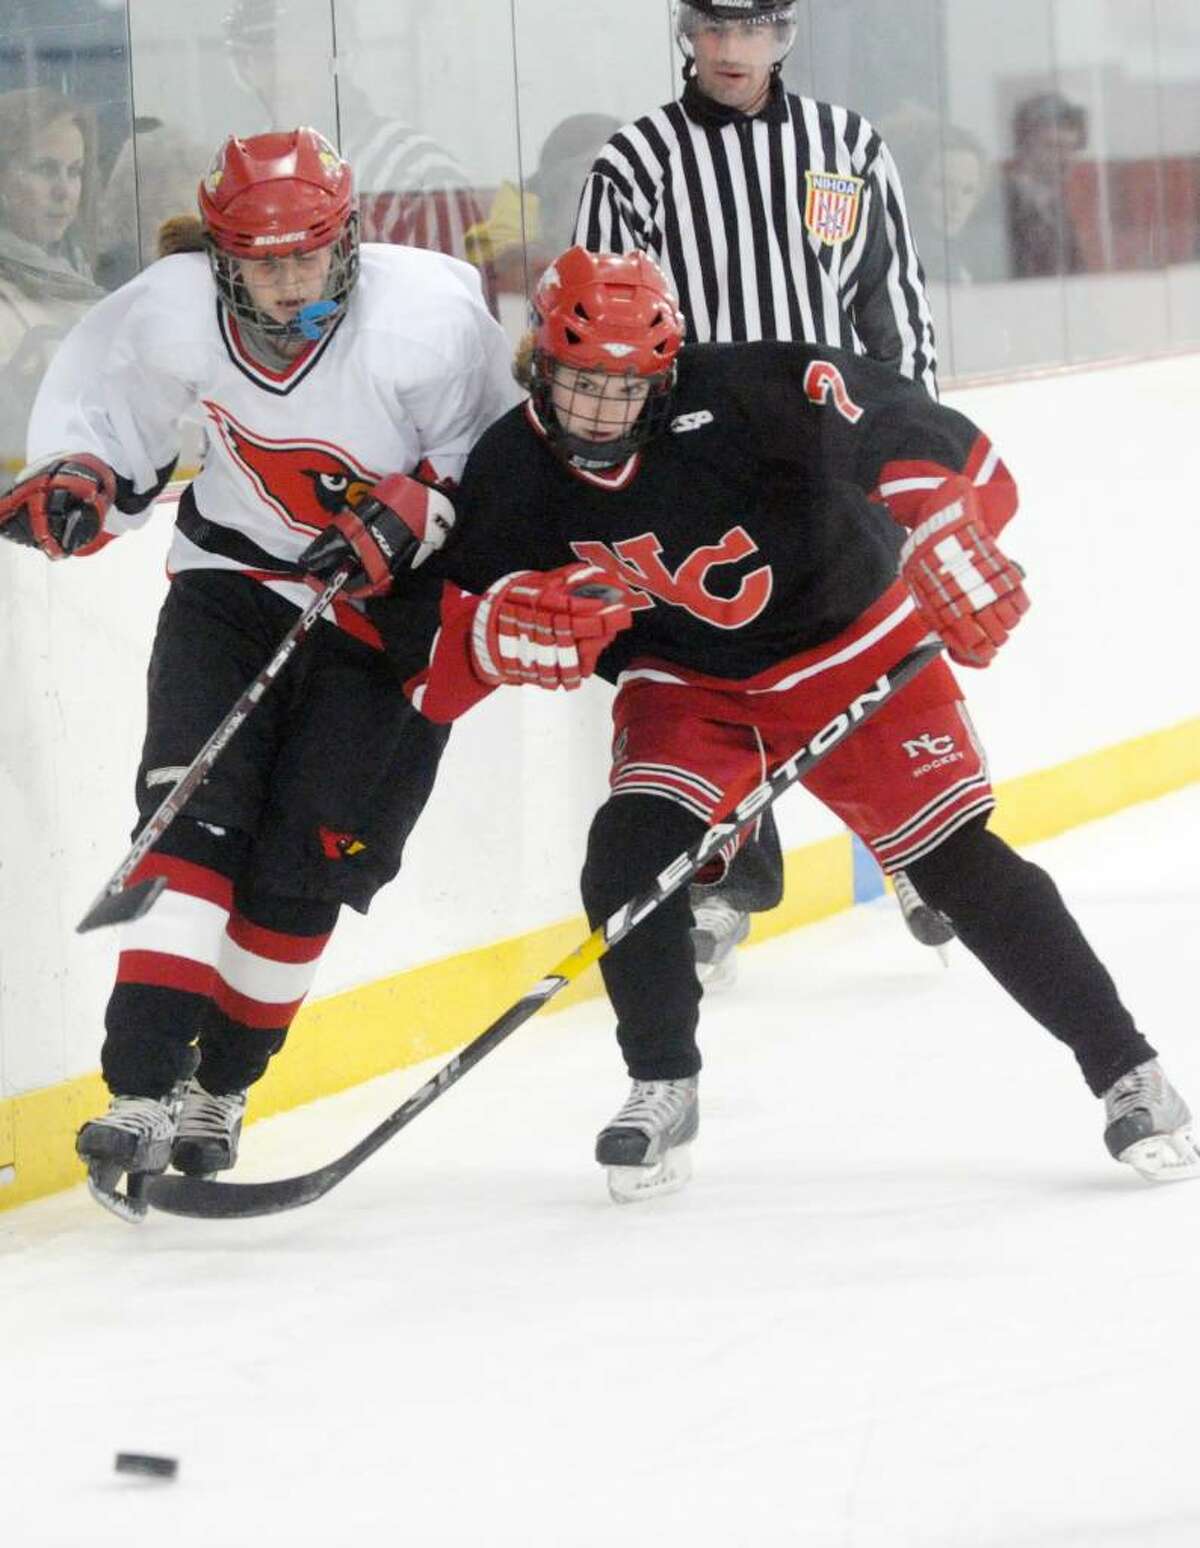 New Canaan's Abbey Buckenheimer shoulders Greenwich's Olivia Tapsall as Greenwich High hosts New Canaan in a girls hockey game at Dorothy Hamill Saturday afternoon, January 16, 2010.